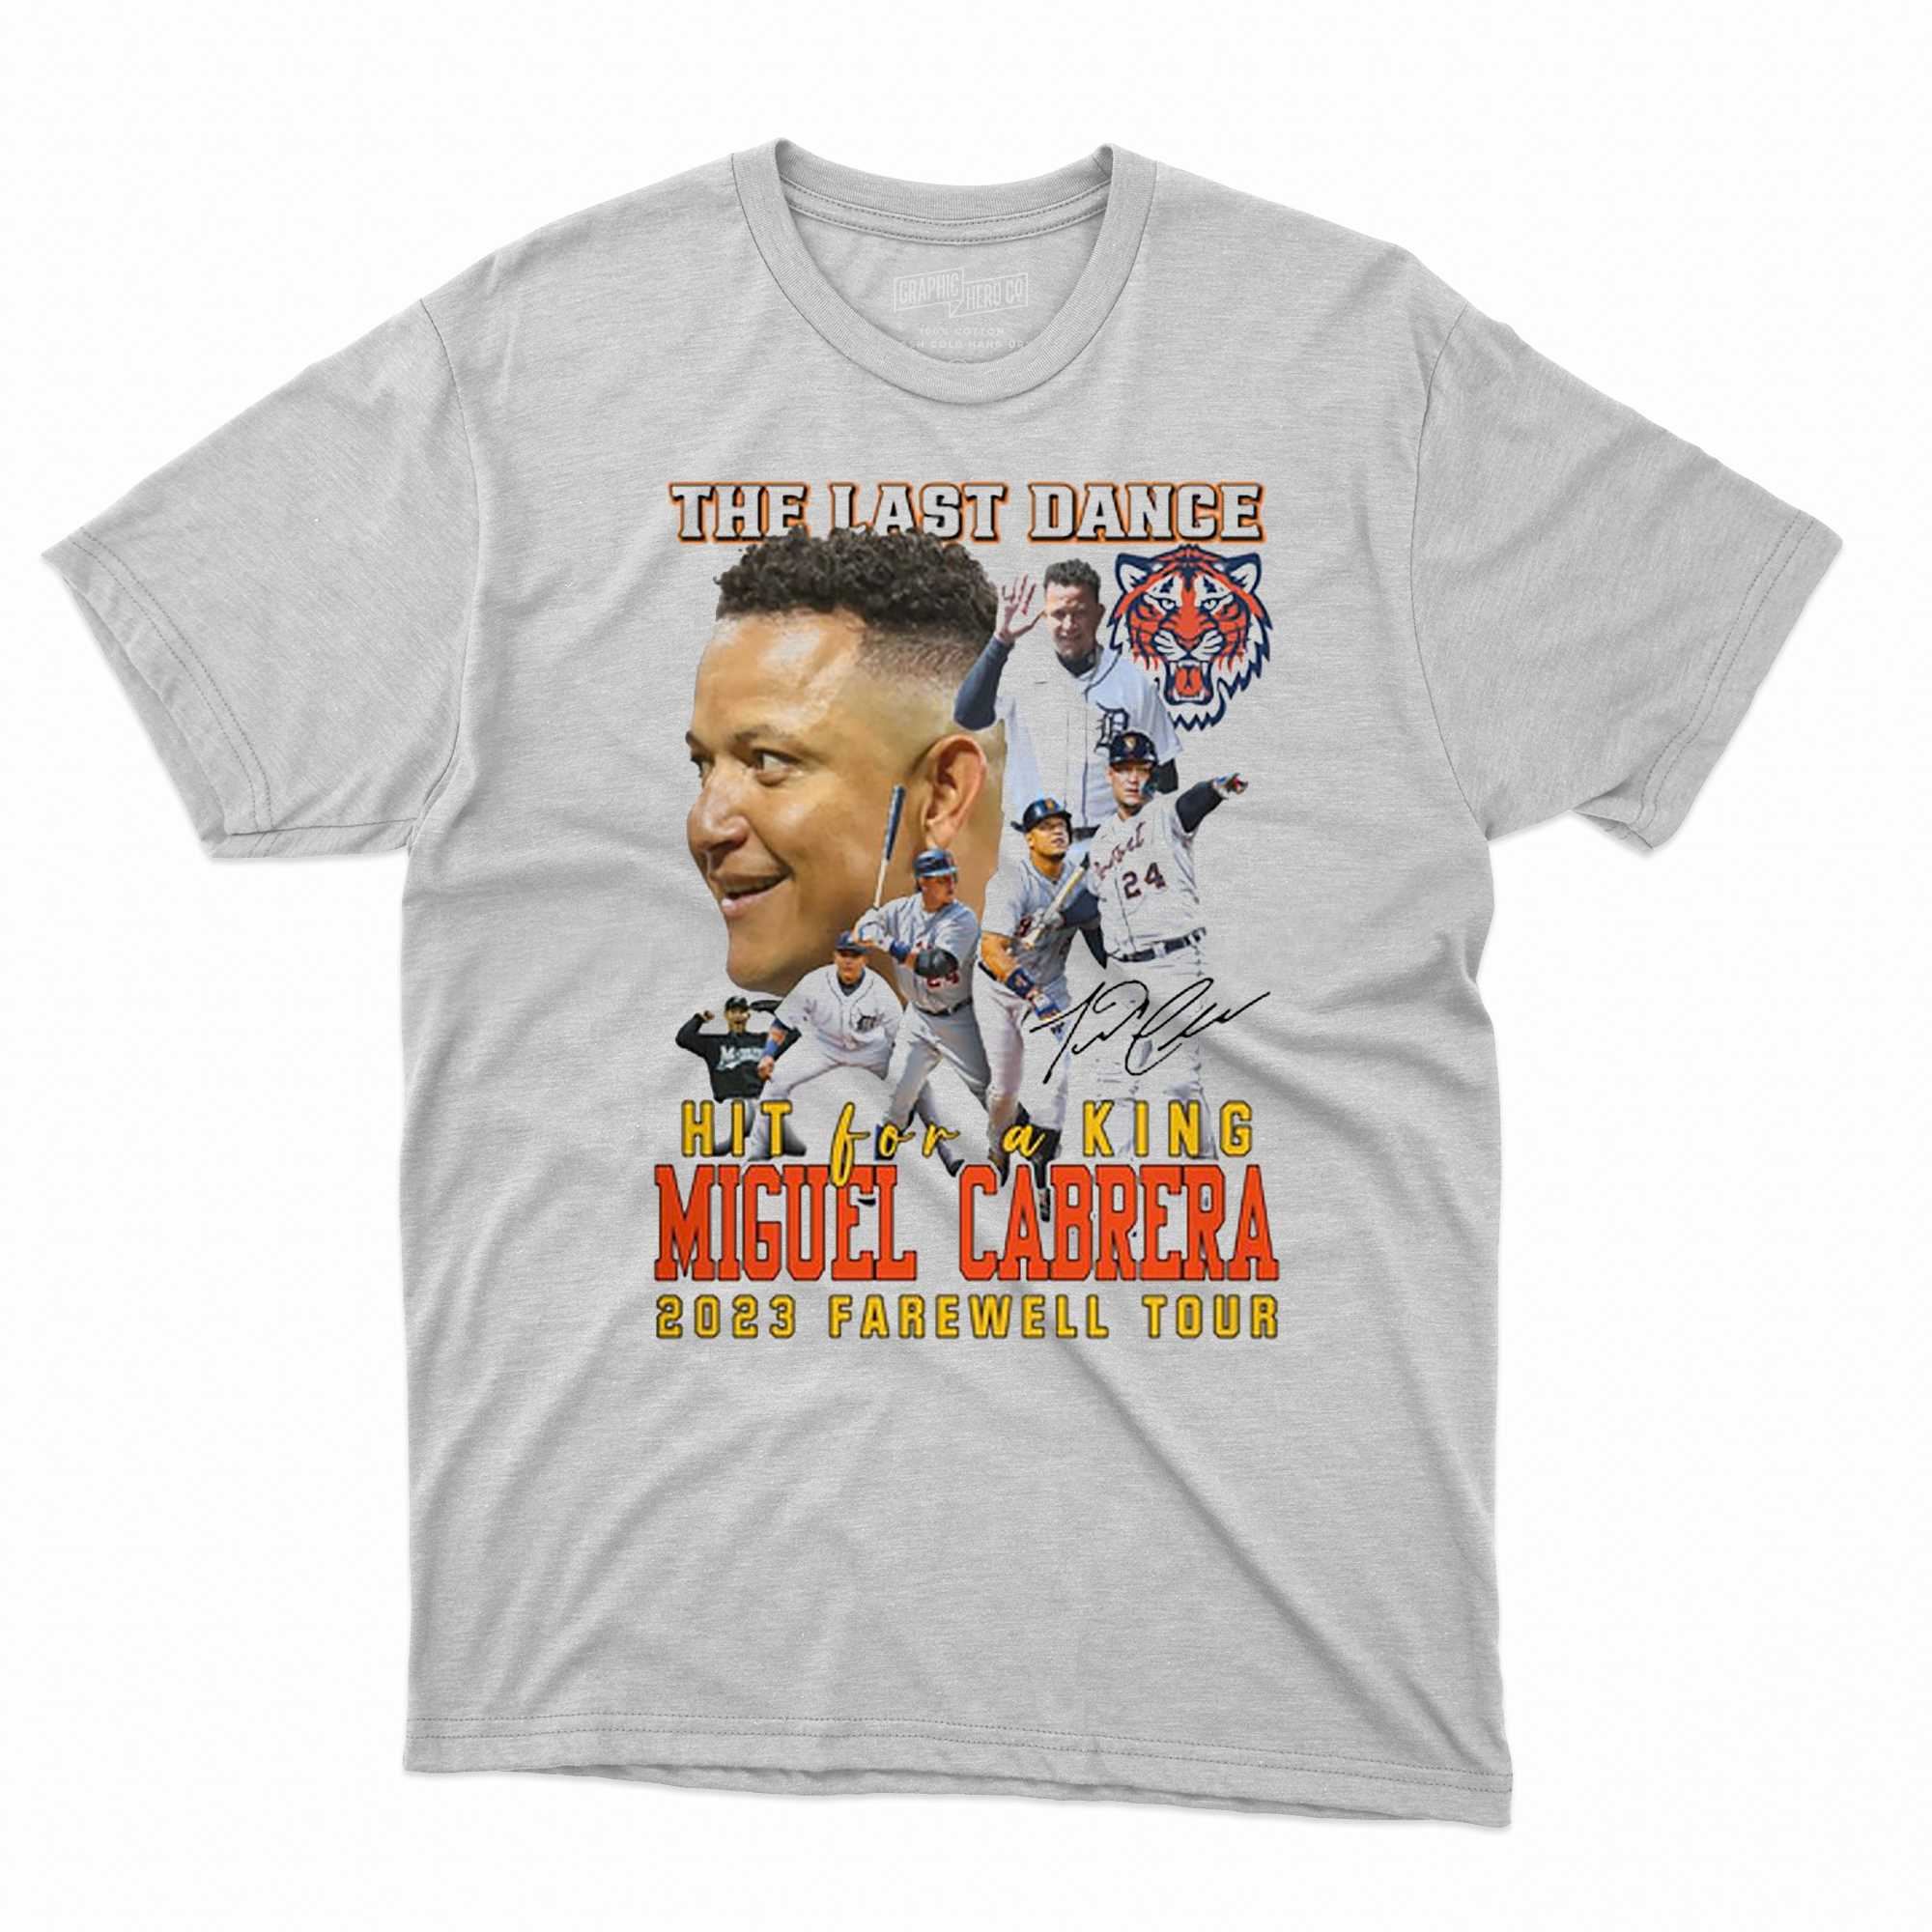 The Last Dance Hit For A King Miguel Cabrera 2023 Farewell Tour T-shirt